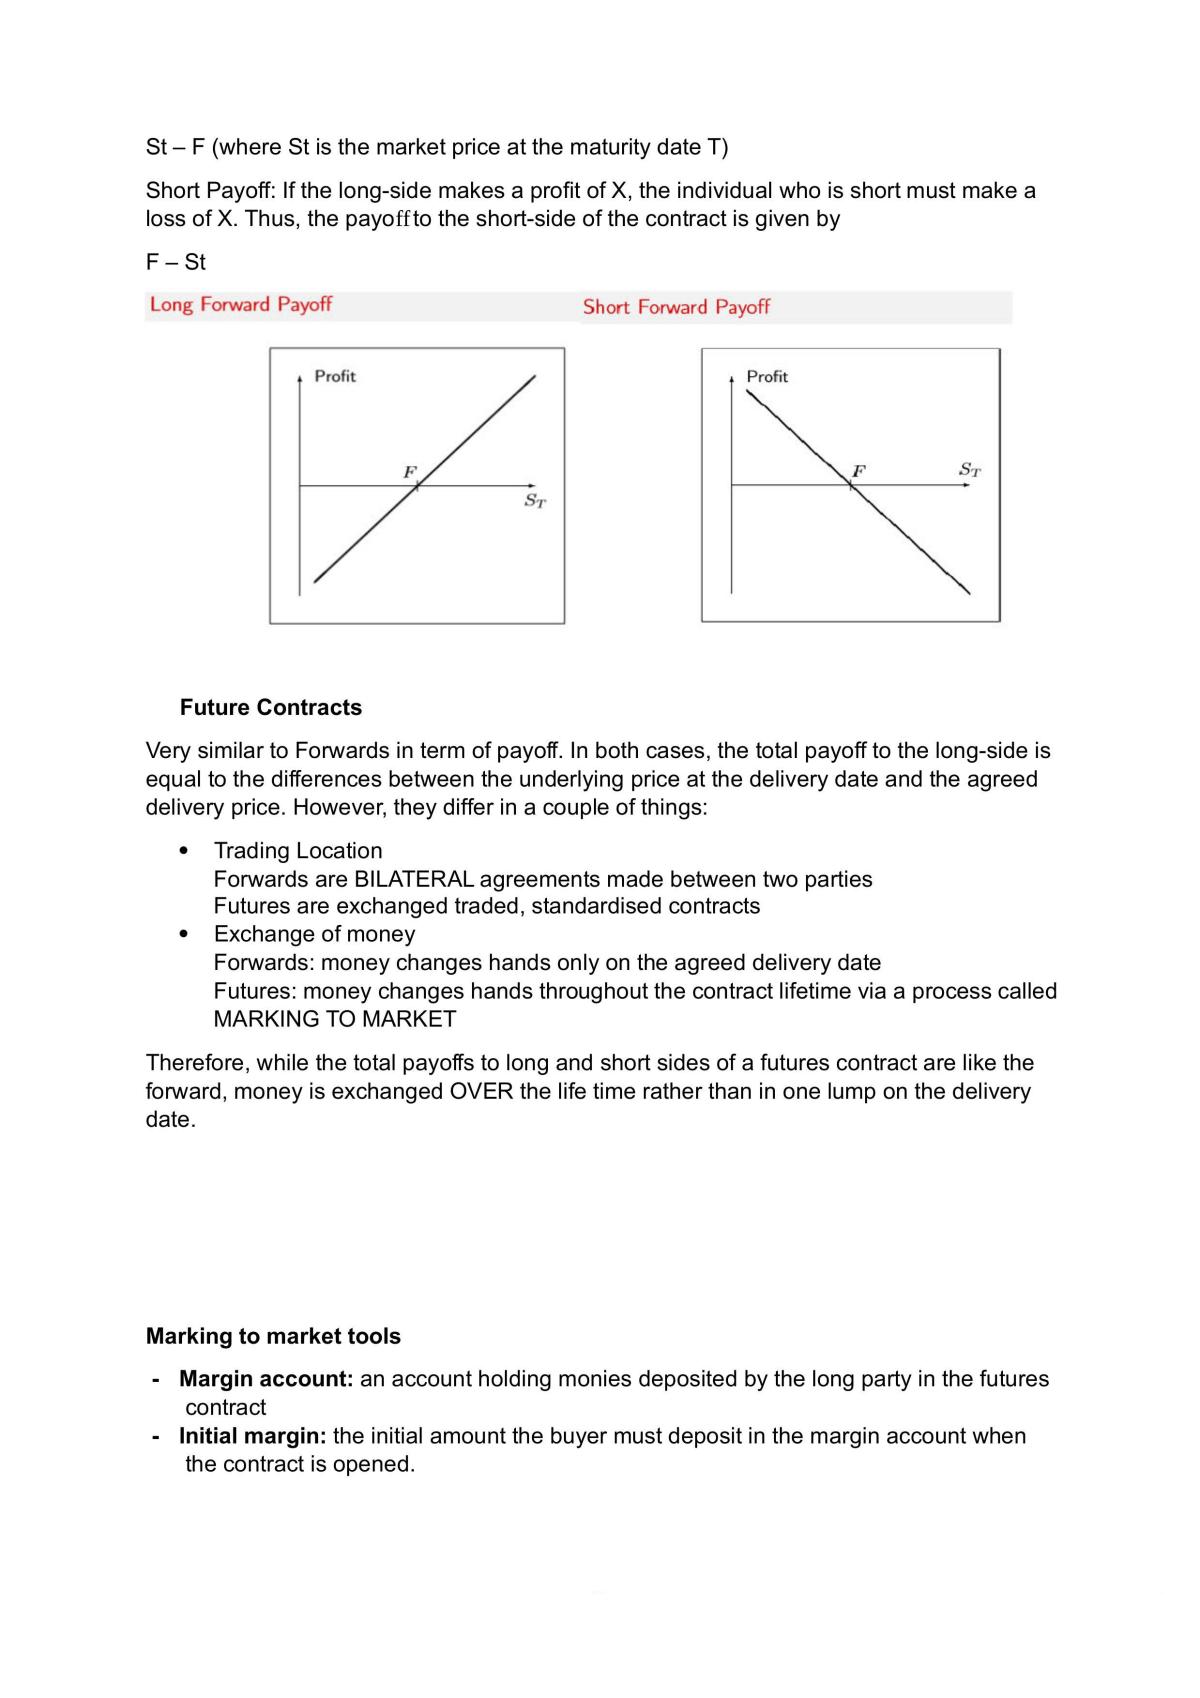 Principles of Finance Revision Guide - Page 30